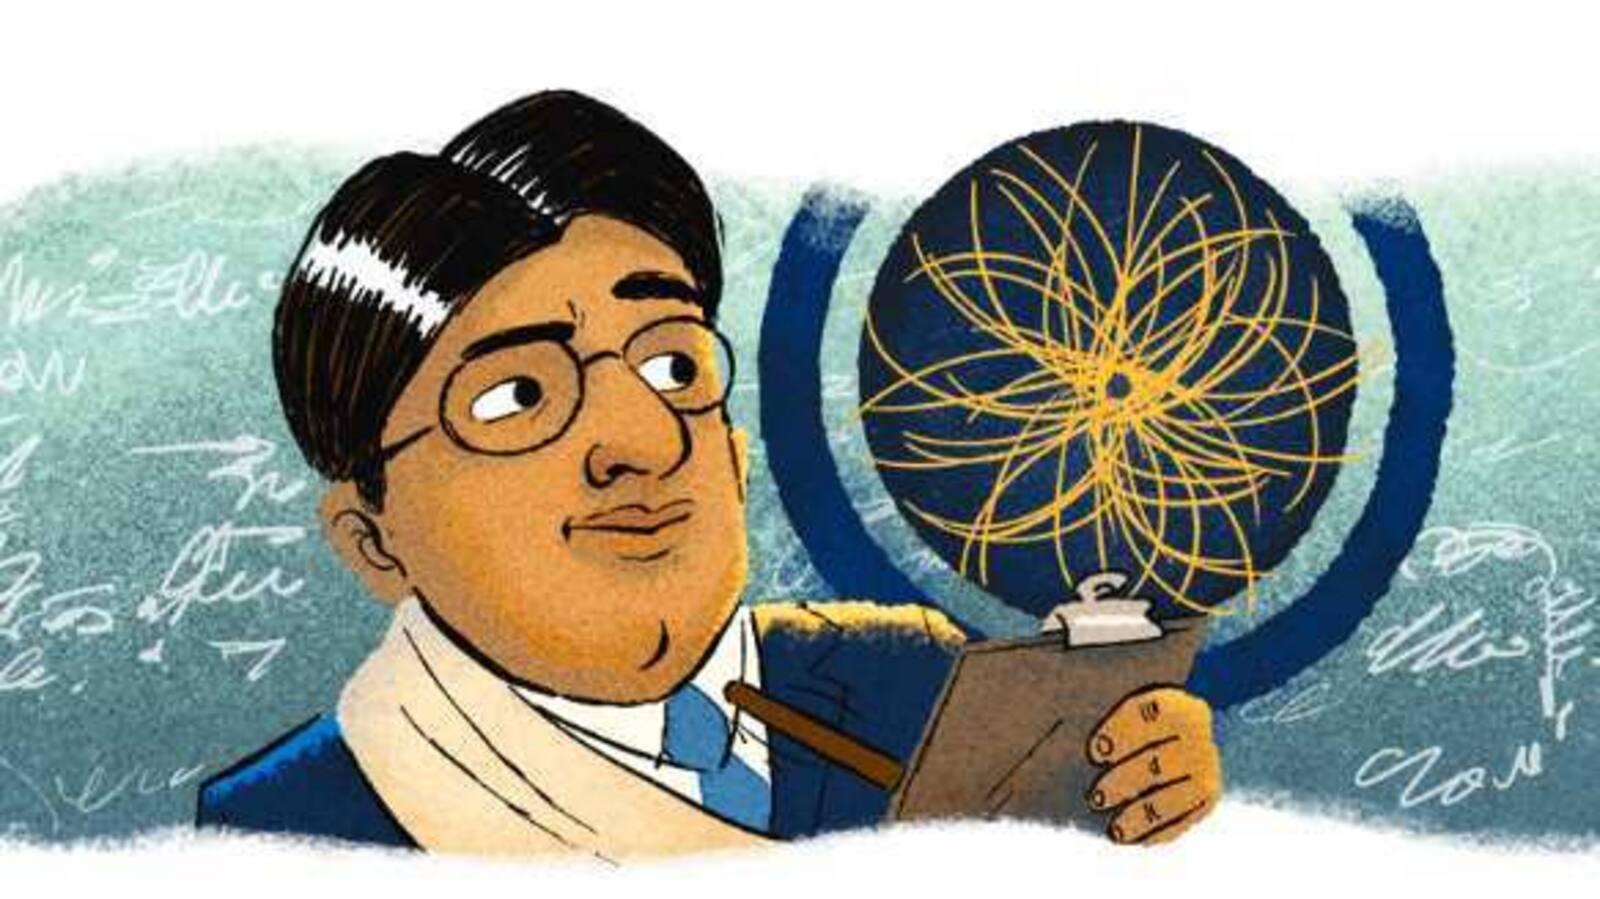 Google Doodle Pays Tribute To Mathematician And Physicist